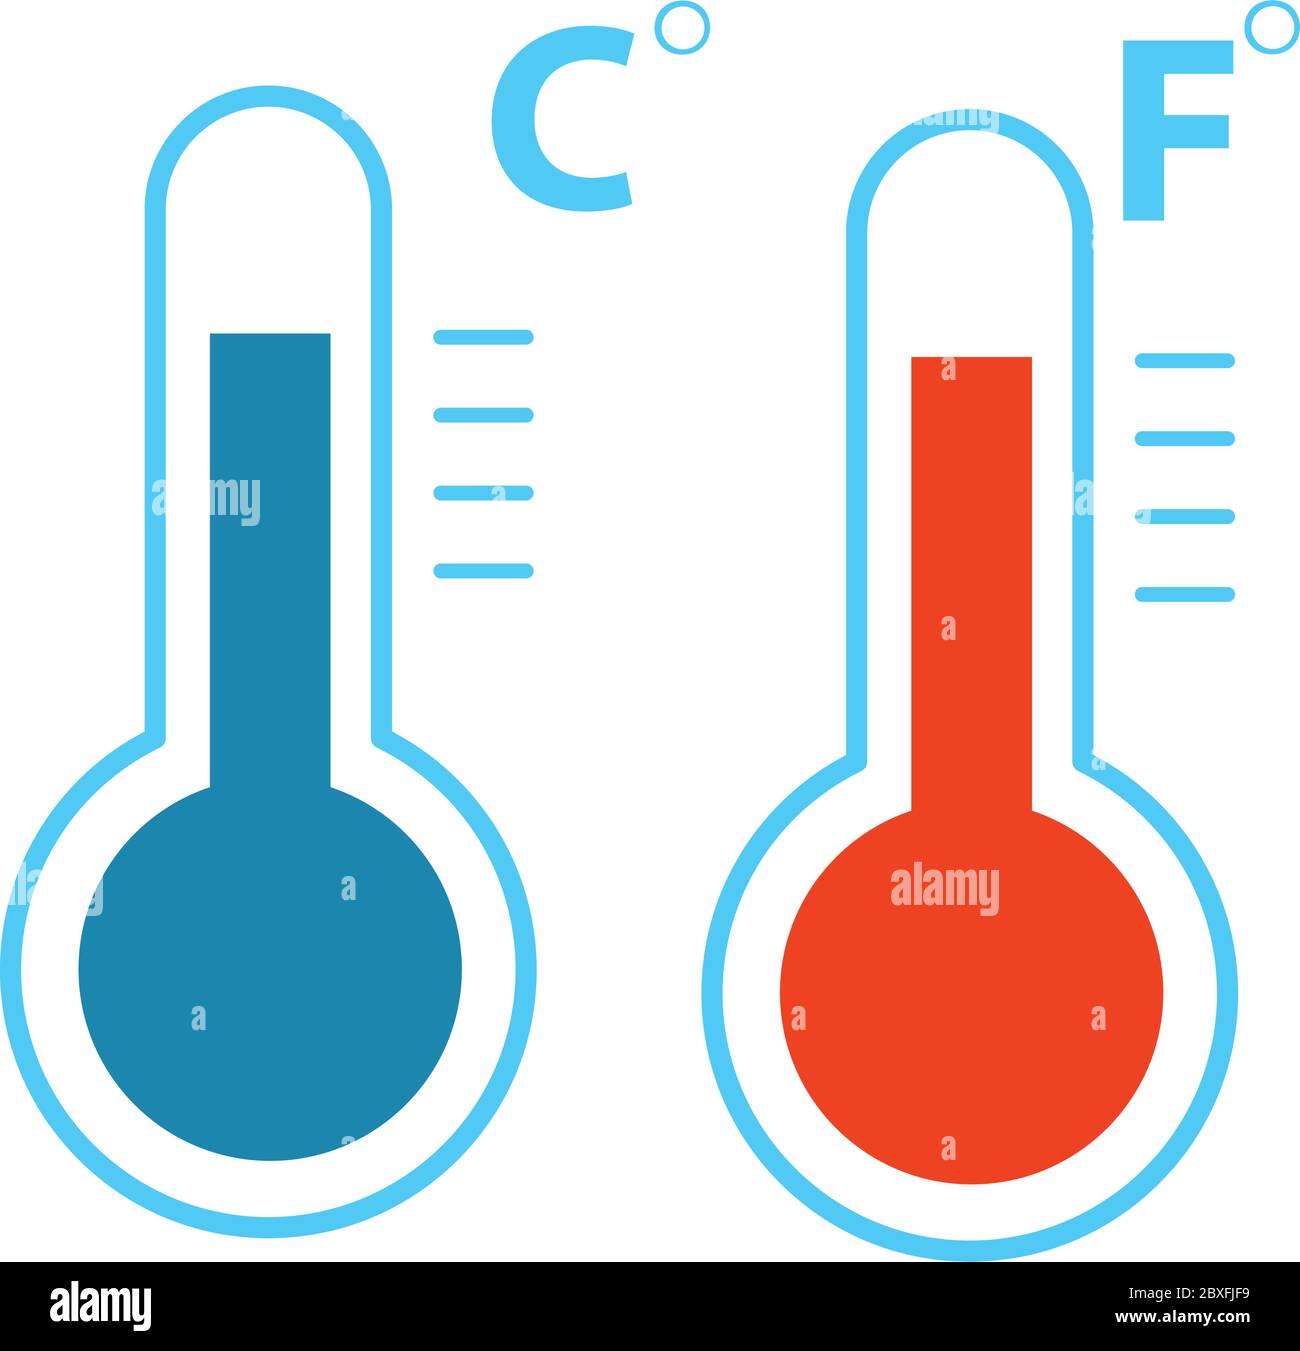 https://c8.alamy.com/comp/2BXFJF9/flat-celsius-and-fahrenheit-thermometers-cold-and-heat-temperature-icon-vector-isolated-eps-10-2BXFJF9.jpg